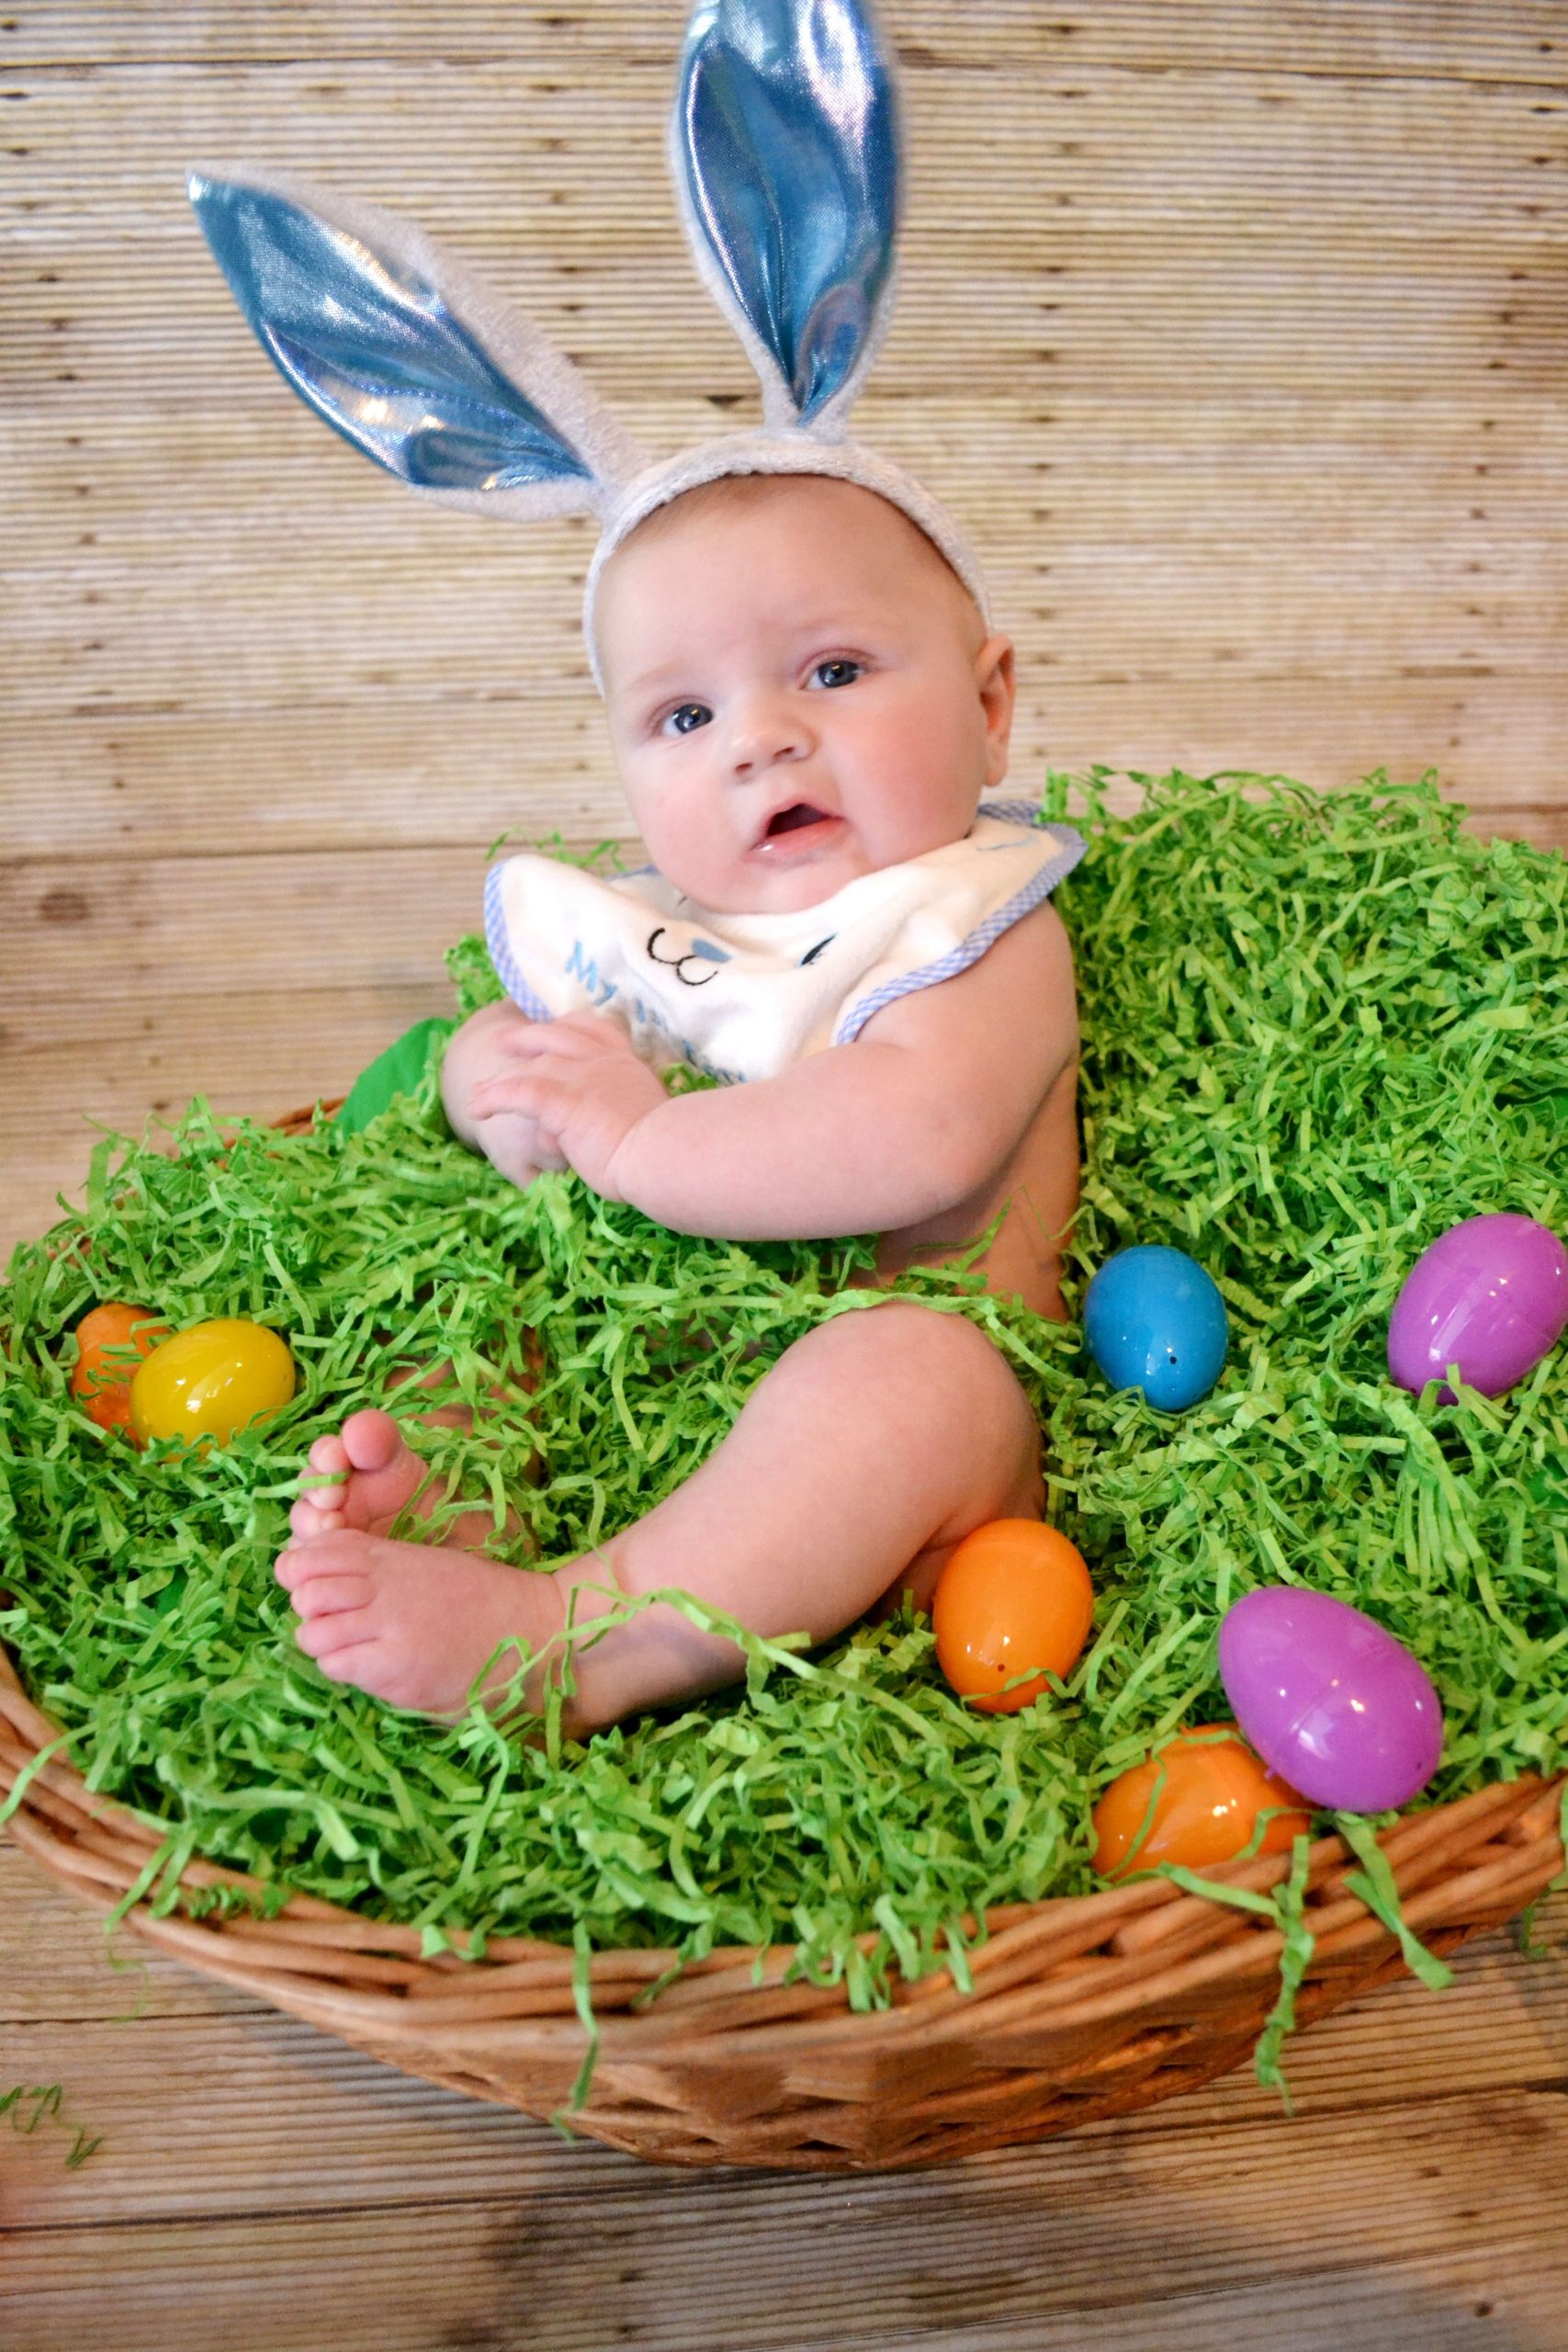 Baby Easter Photo Ideas
 Pin by Brittany Madden on Madden graphy